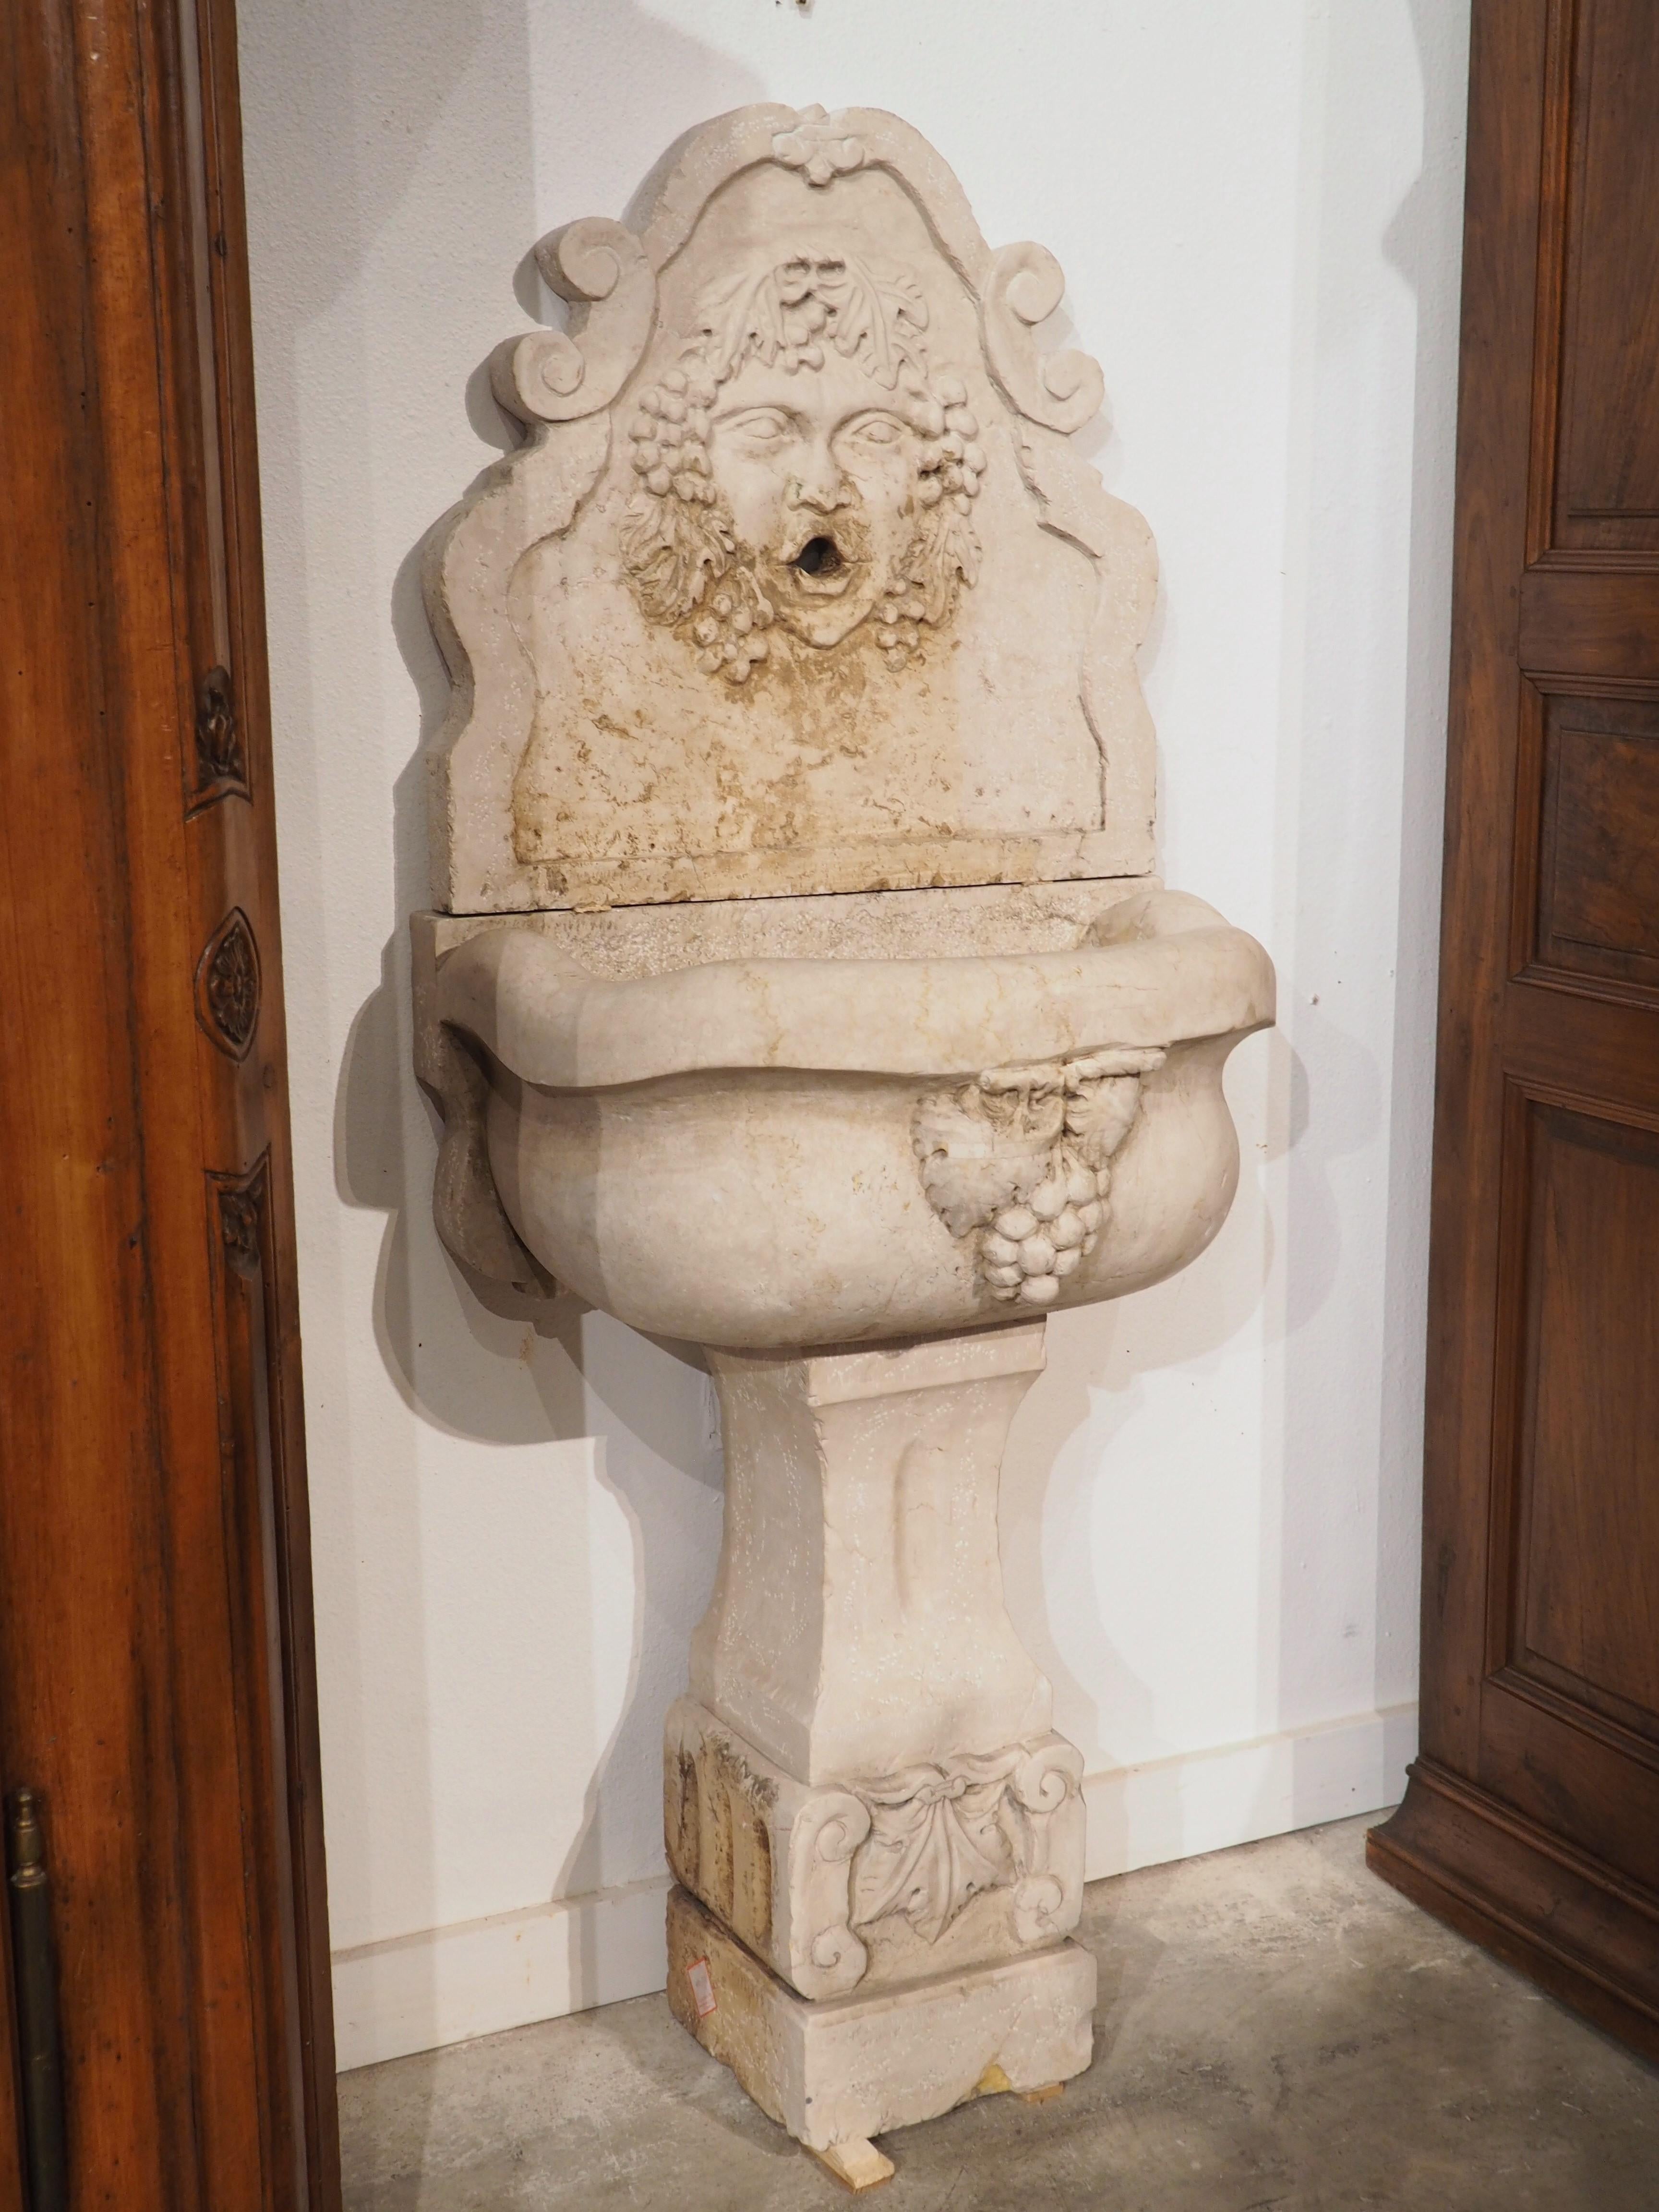 Comprised of three pieces of hand-carved Italian marble, this wall fountain features a neoclassical depiction of the Roman god Bacchus (his Greek name was Dionysus). As Bacchus was the god of winemaking, he is often depicted in art with symbolic